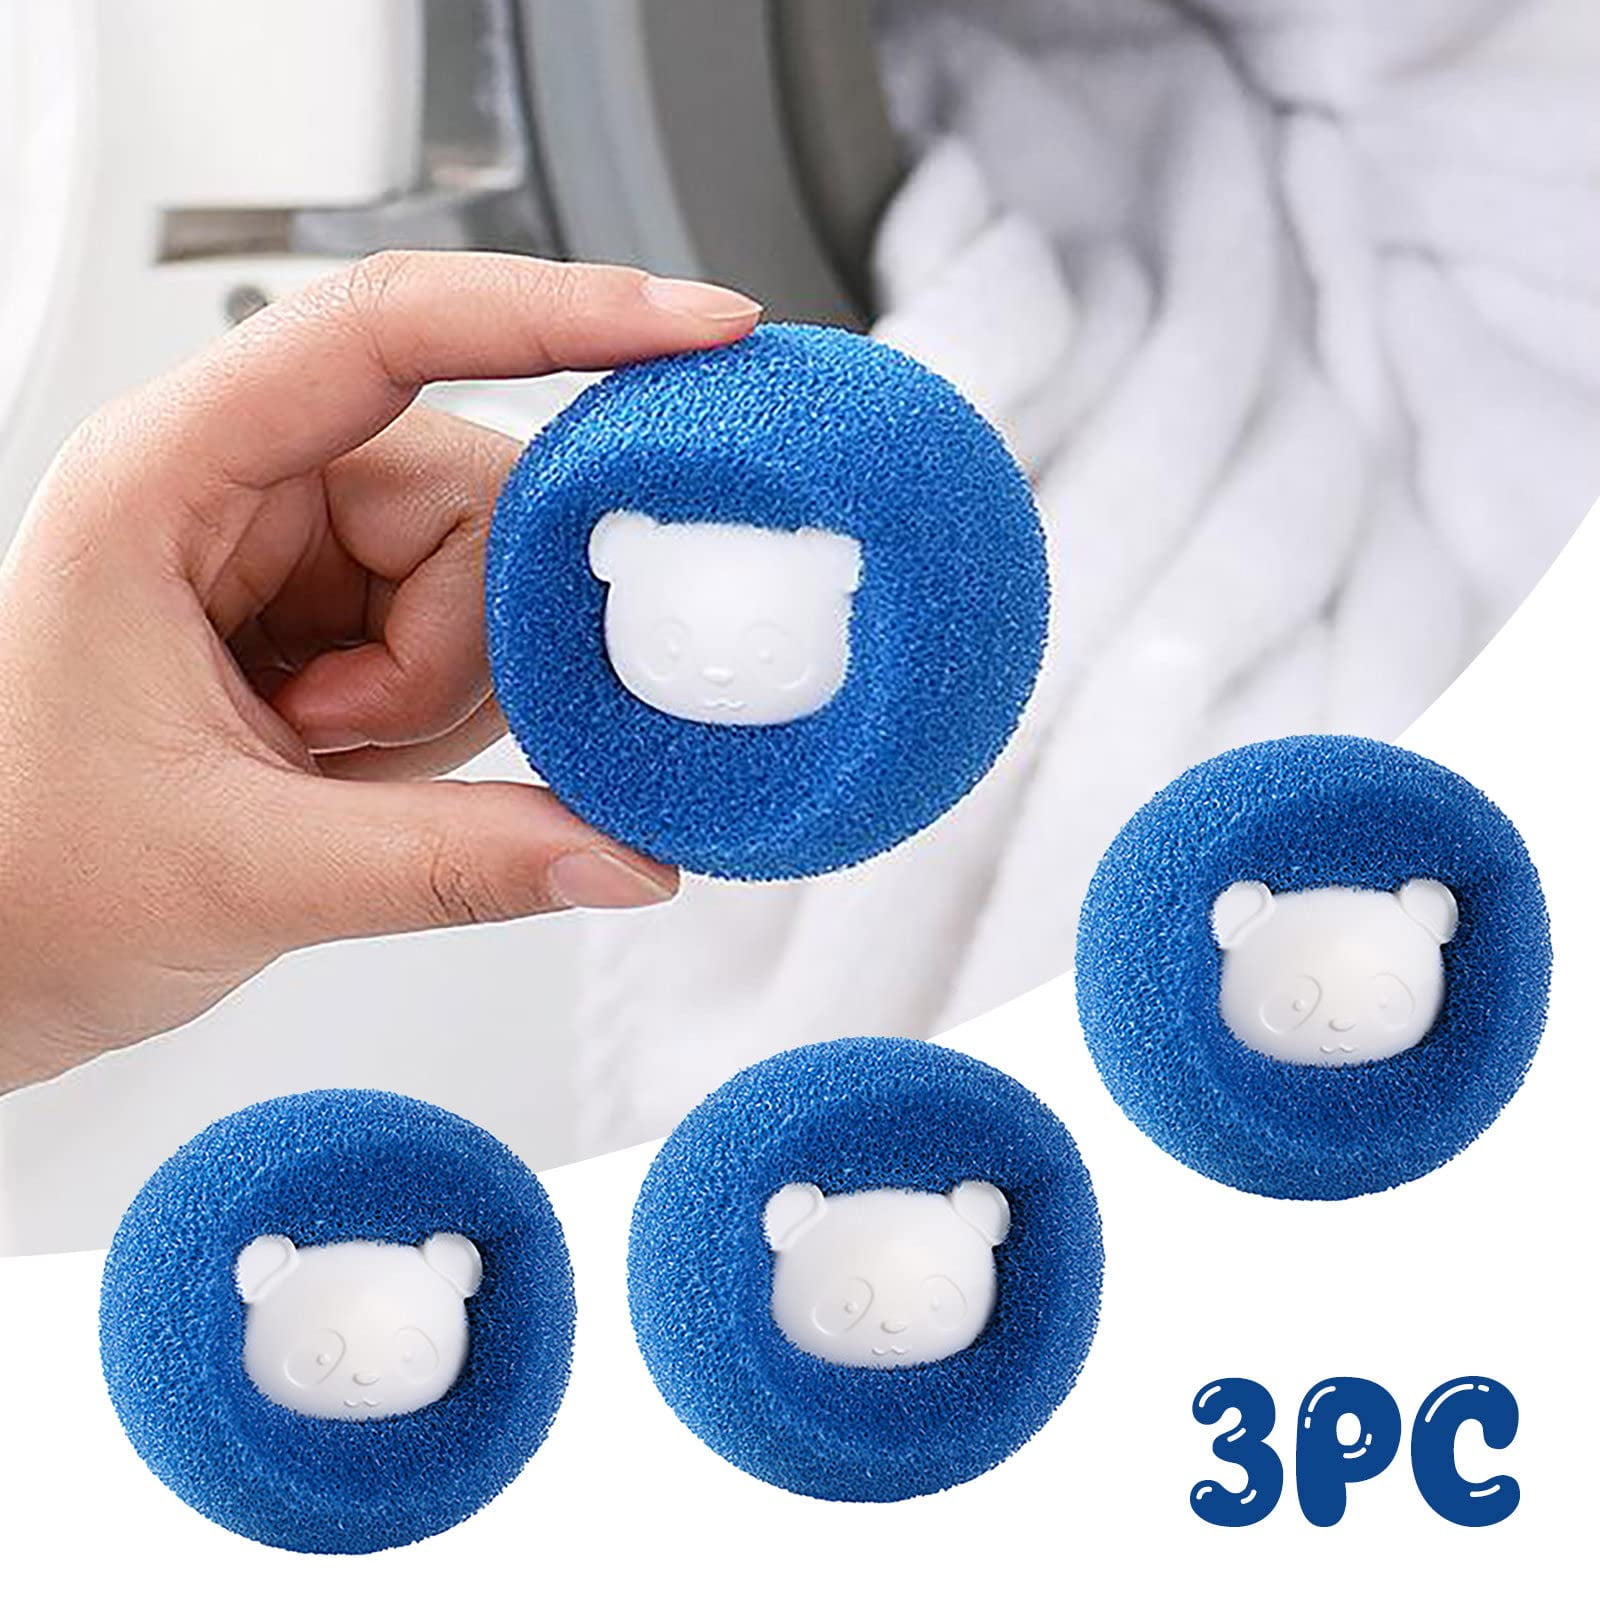 Laundry Ball Kit Reusable Clothes Hair Cleaning Tool Pet Hair